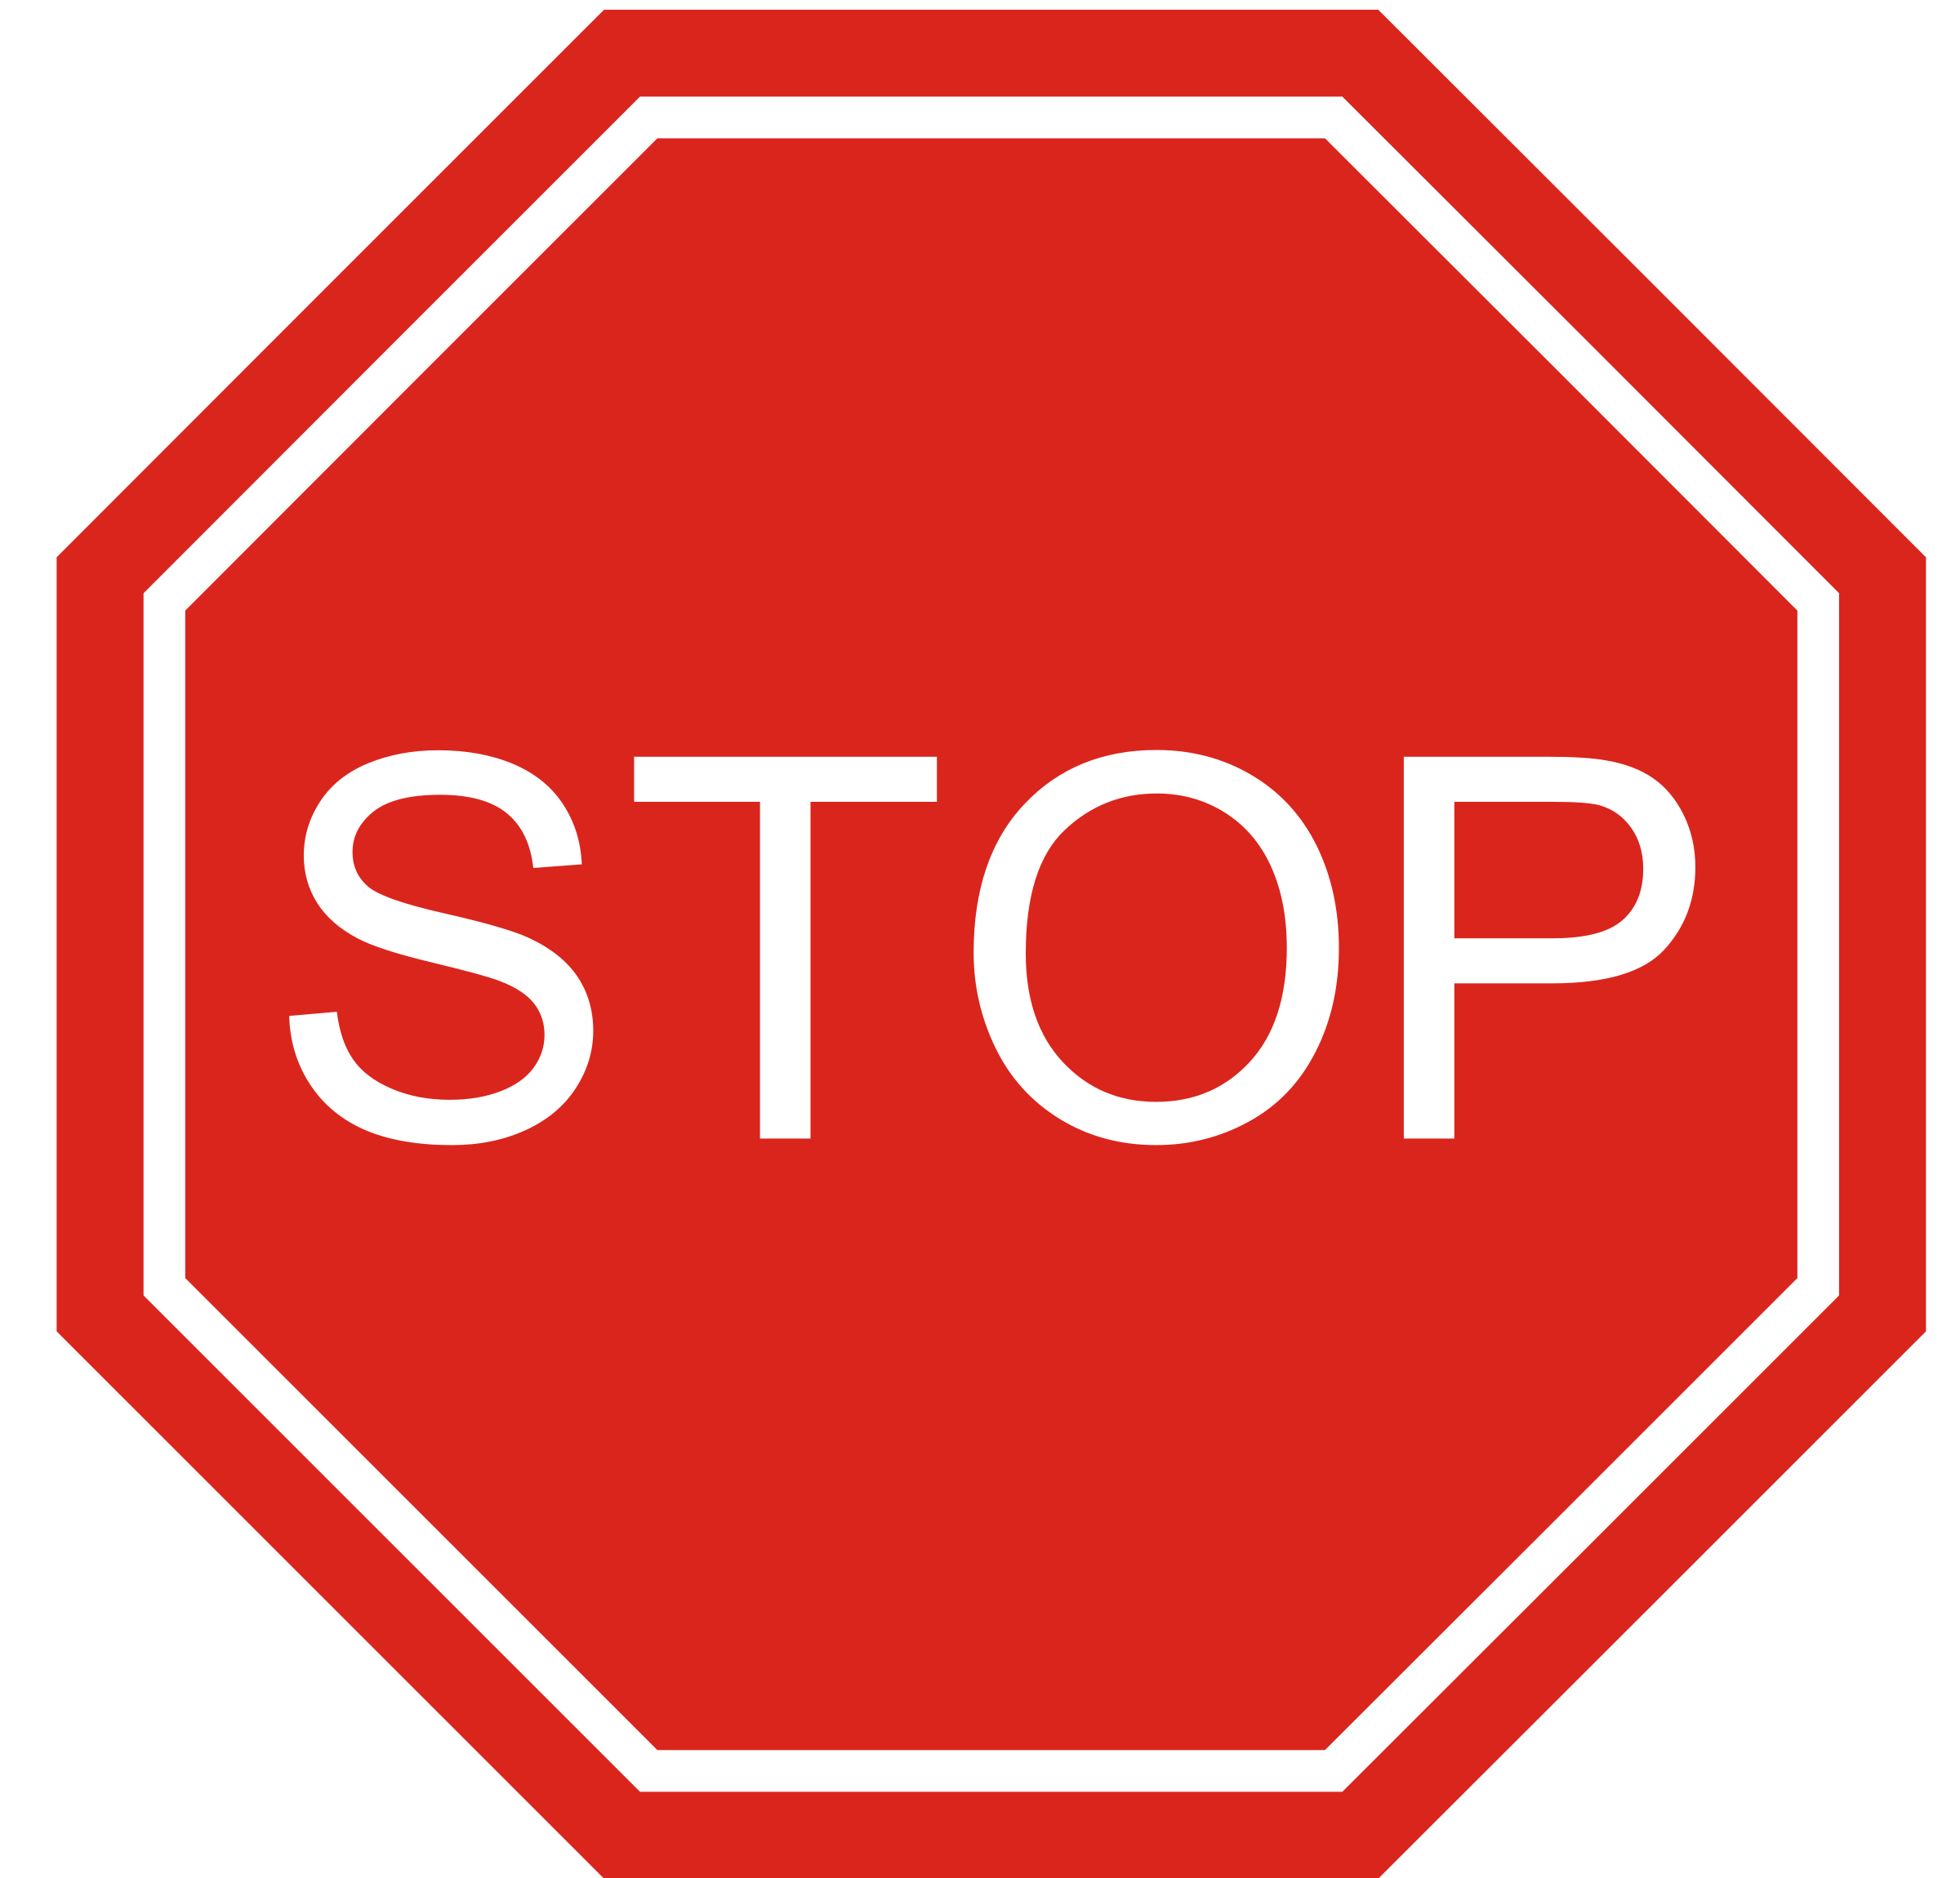 free-image-of-stop-sign-download-free-image-of-stop-sign-png-images-free-cliparts-on-clipart